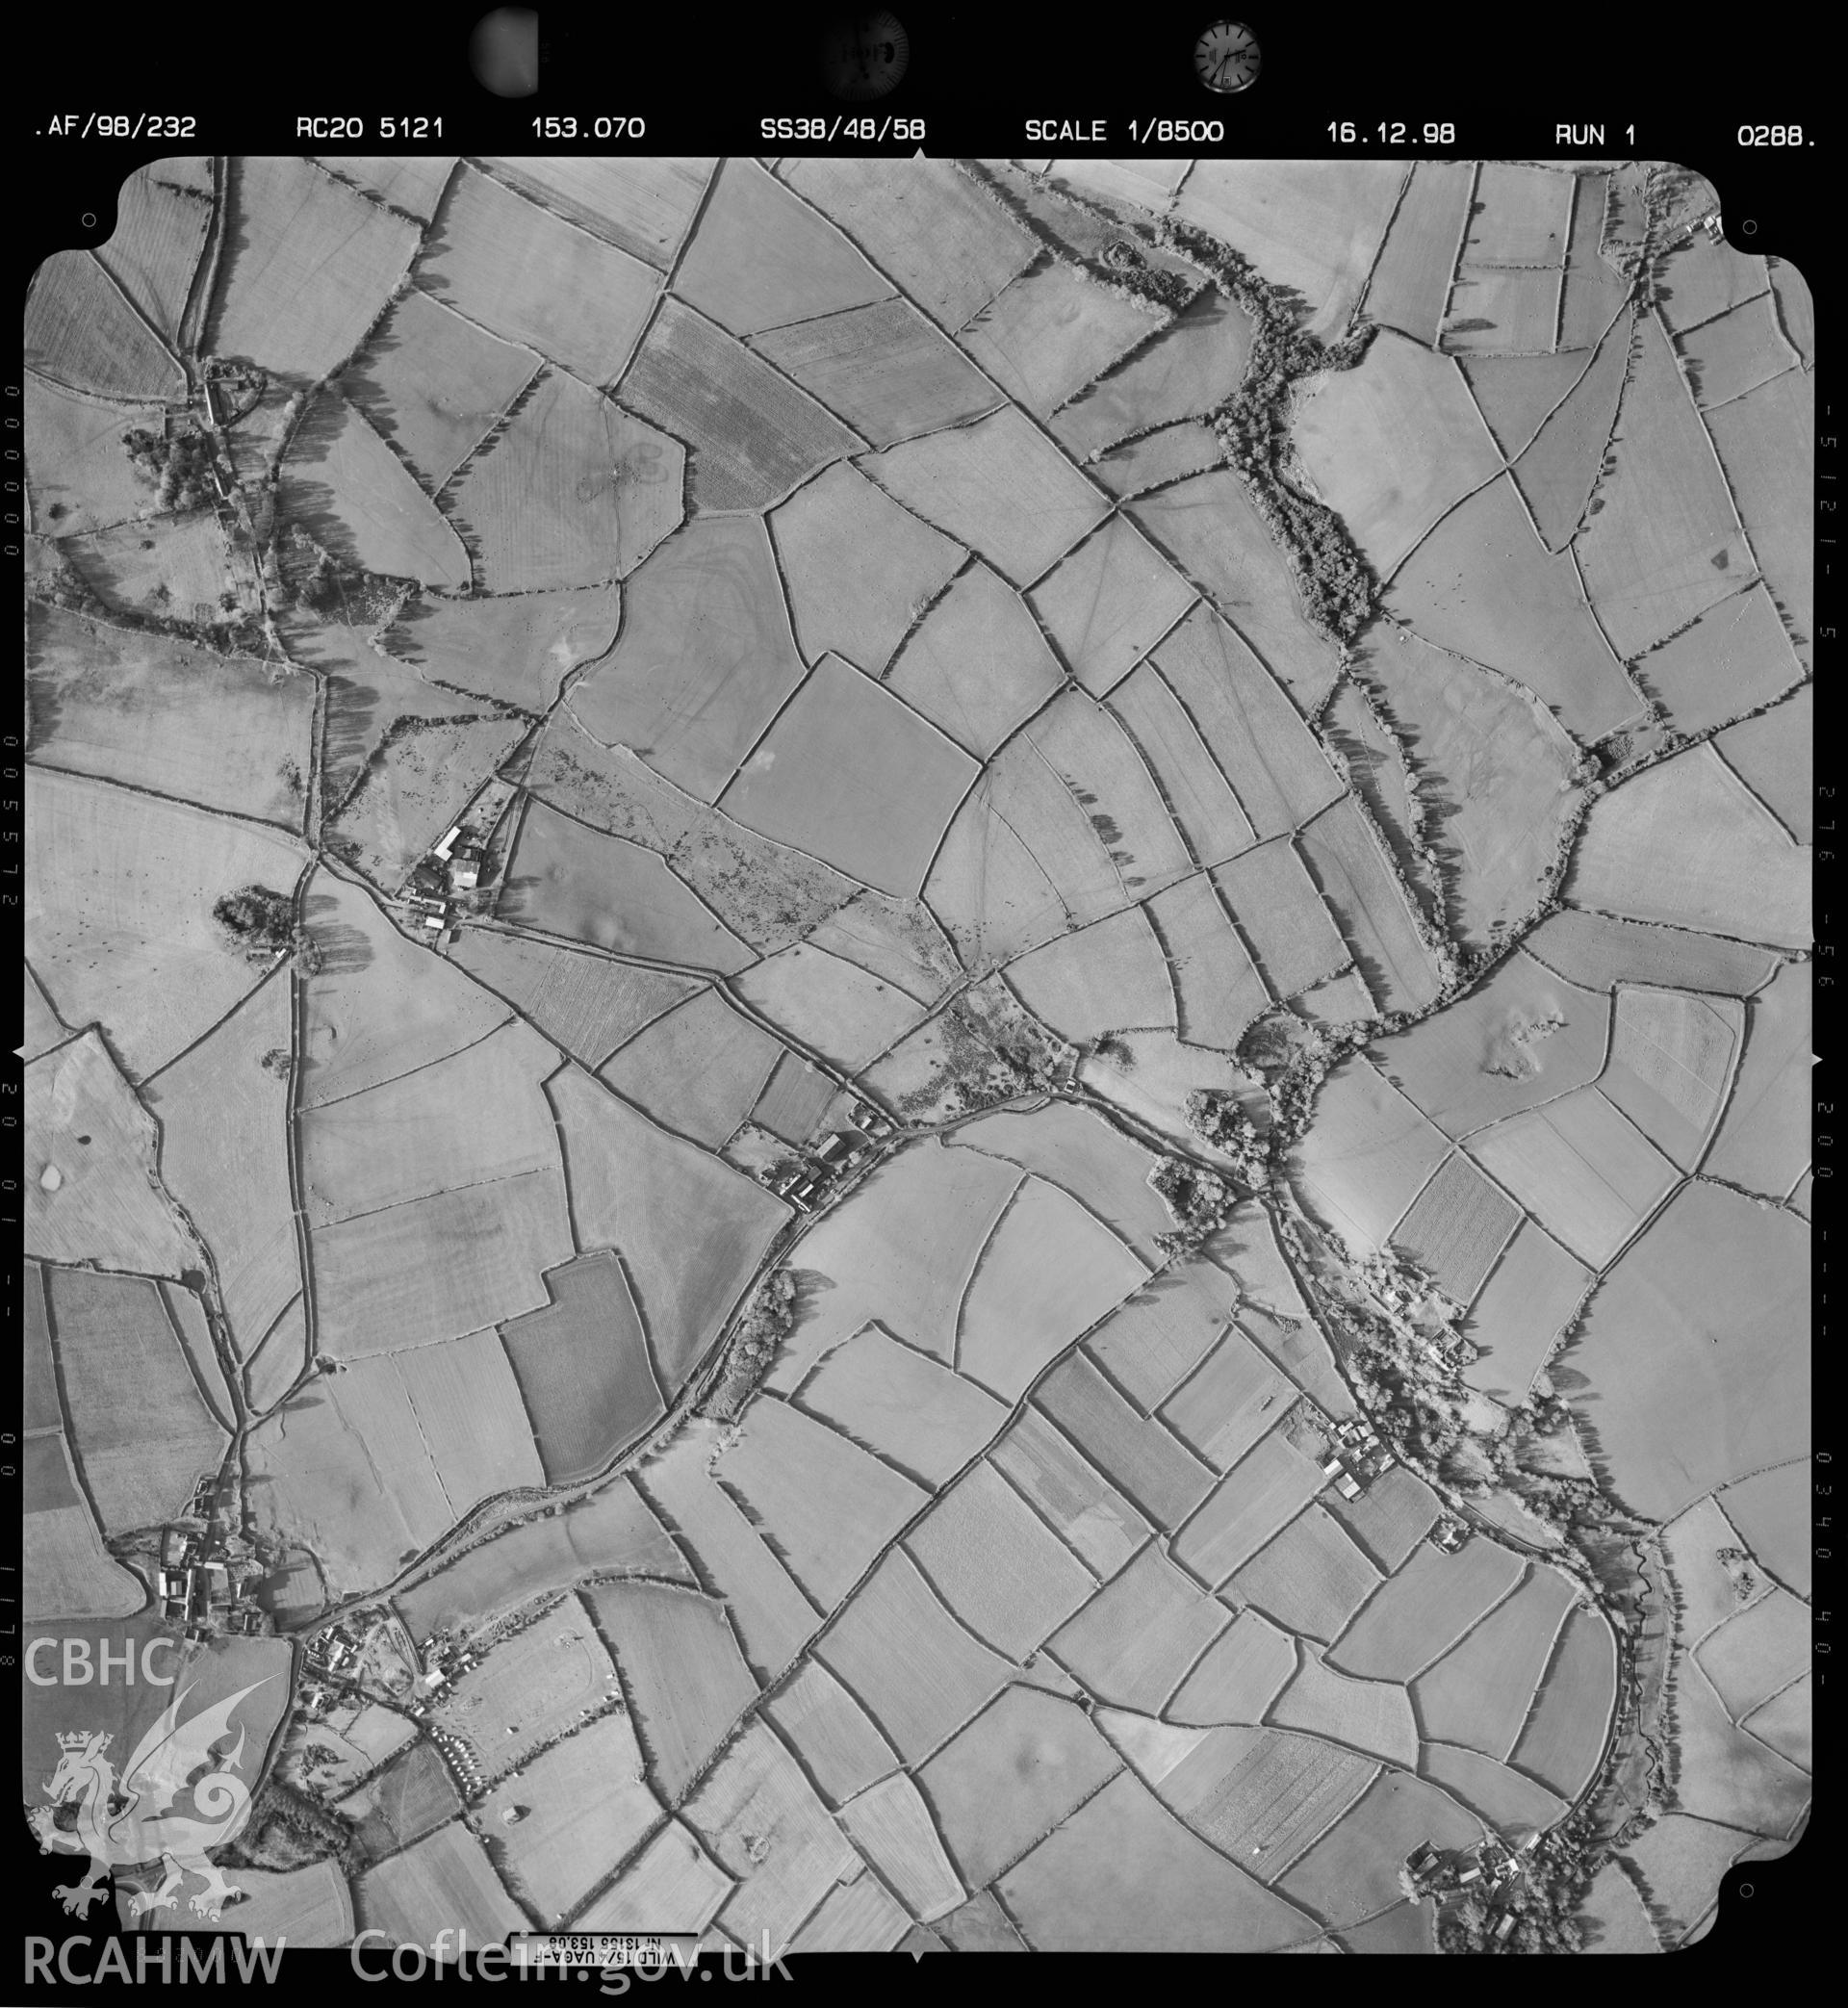 Digitized copy of an aerial photograph showing the area around Barry, taken by Ordnance Survey, 1998.